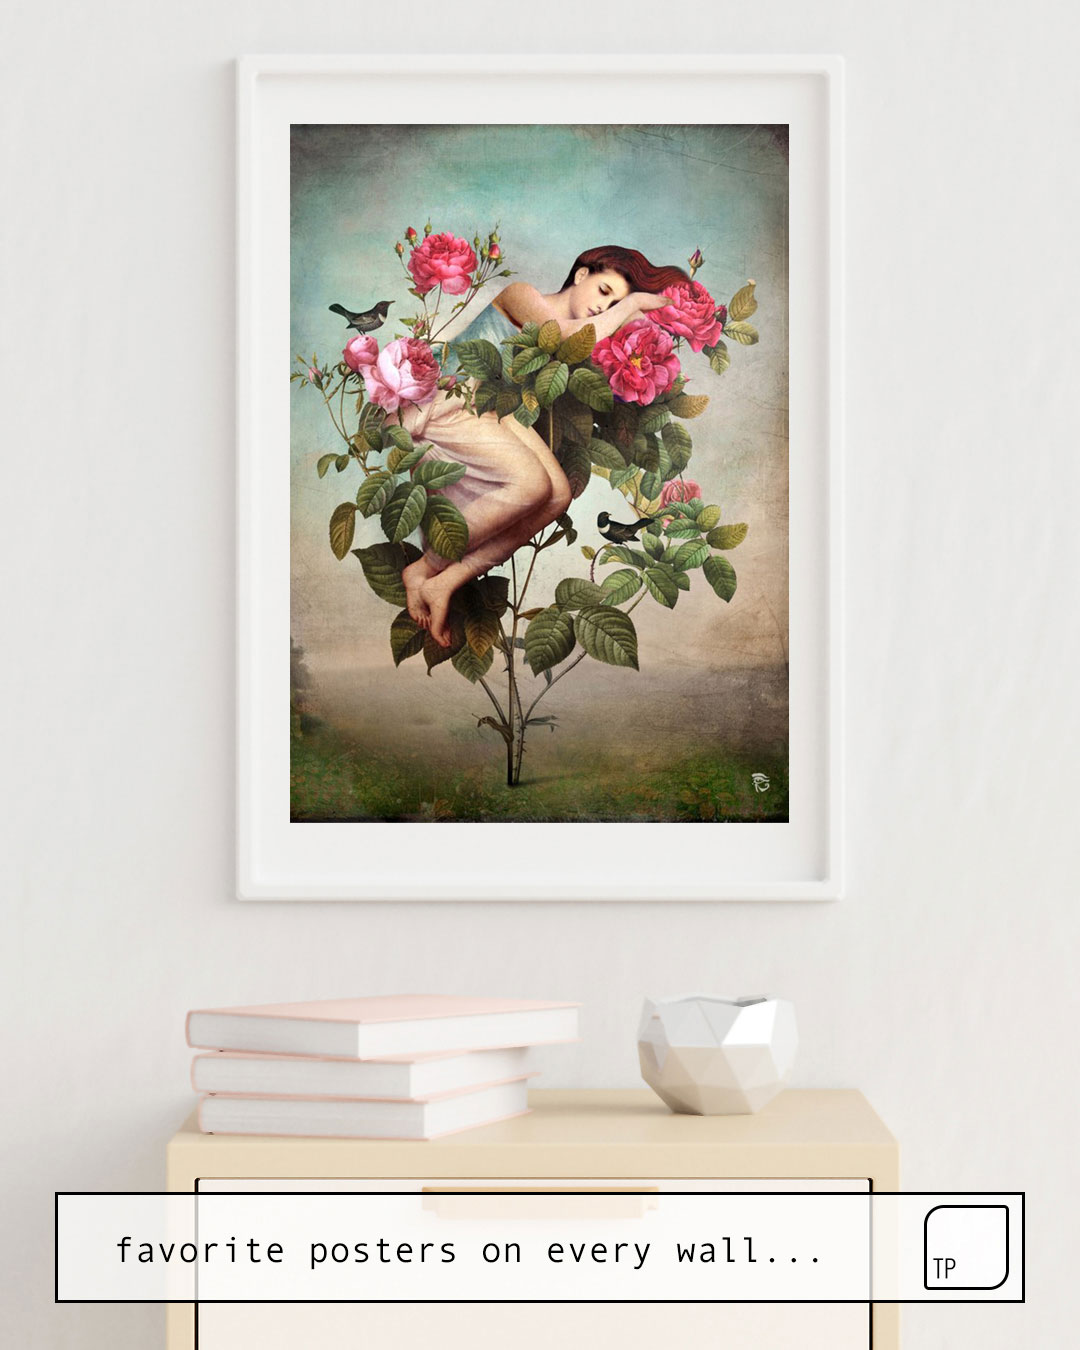 The photo shows an example of furnishing with the motif IN BLOOM by Christian Schloe as mural